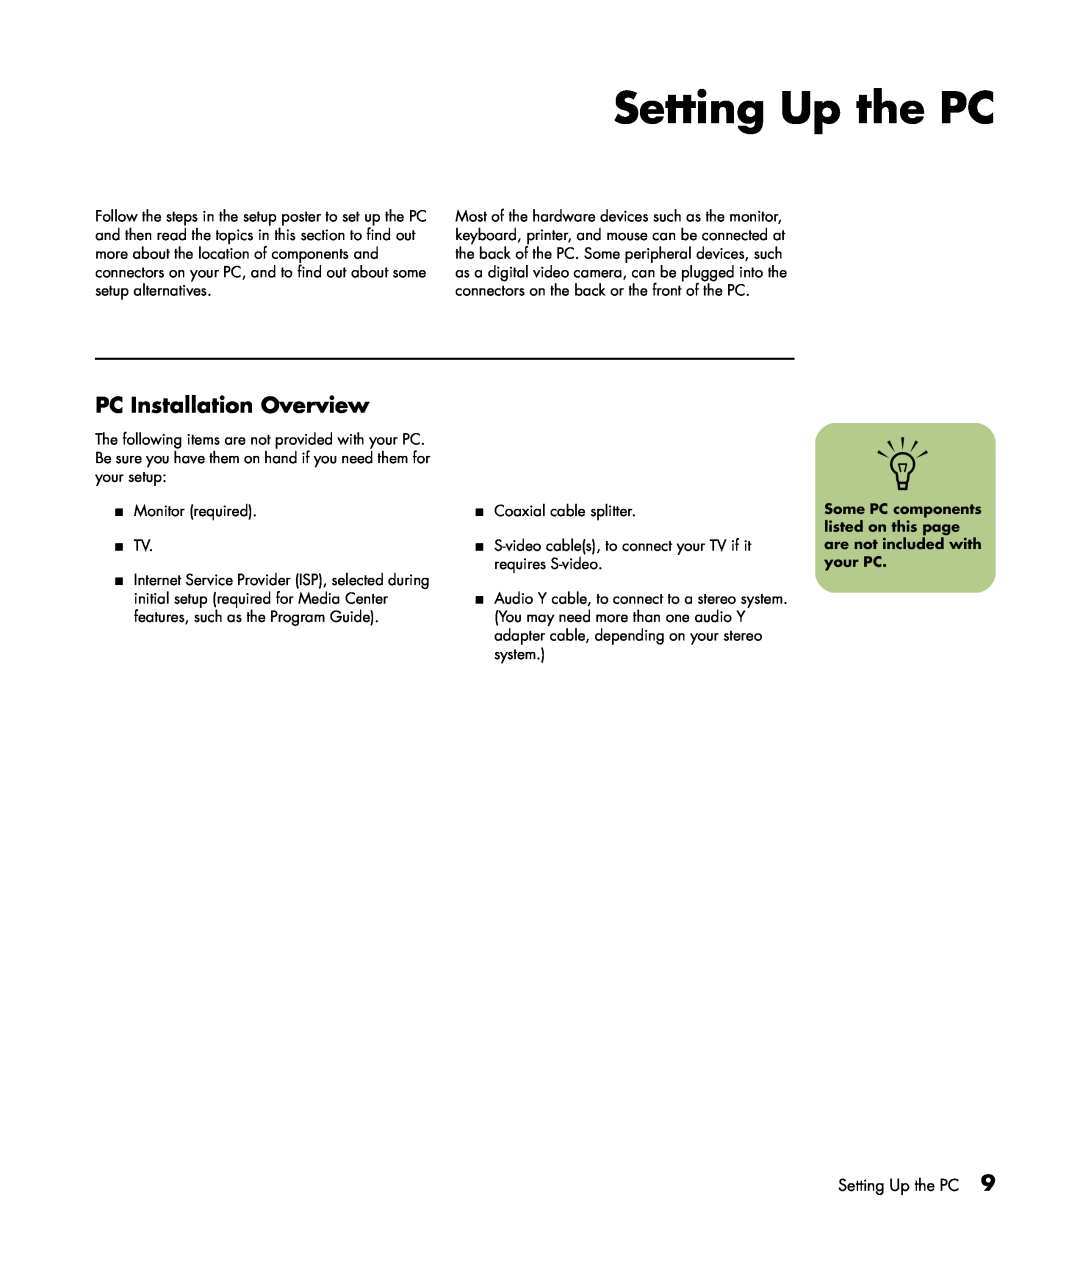 HP m1171n, m1299a, m1050y (PJ720AV), m1050e (PU061AV), m1050y (PU060AV), m1297c Setting Up the PC, PC Installation Overview 